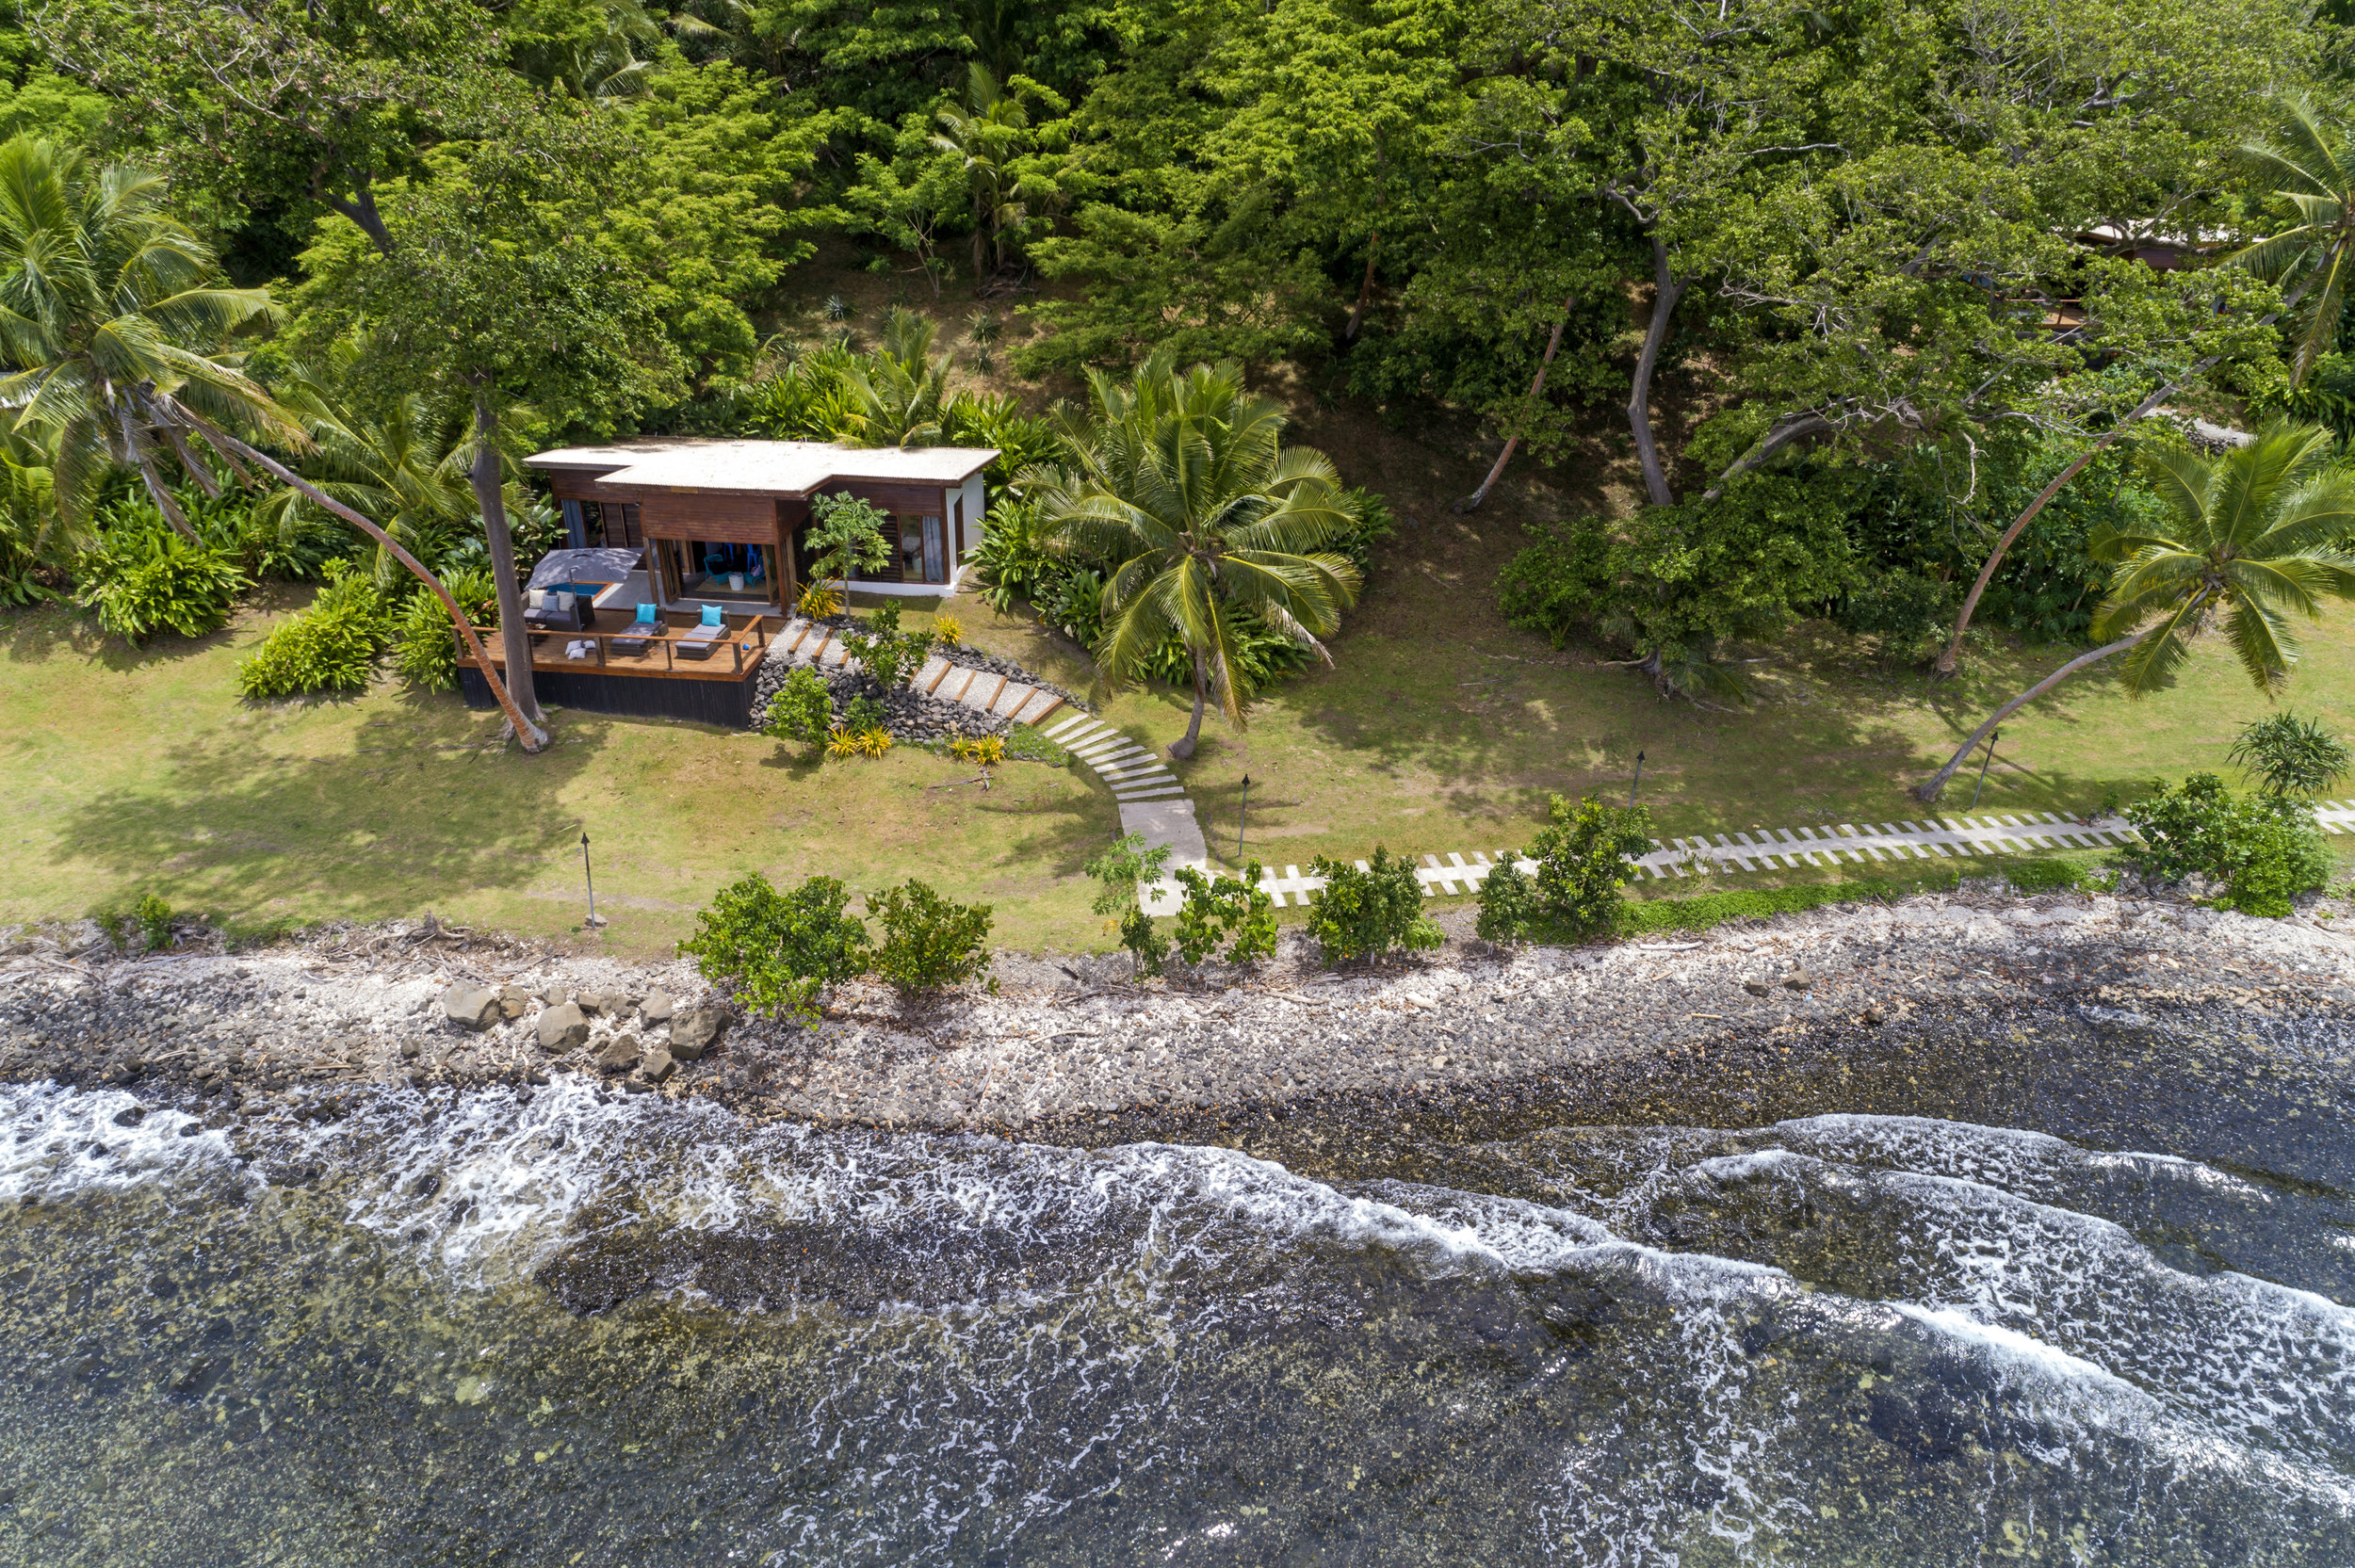 Fiji Resort - Two-bedroom Family Accommodation - up to four persons, The Remote Resort Fiji Islands